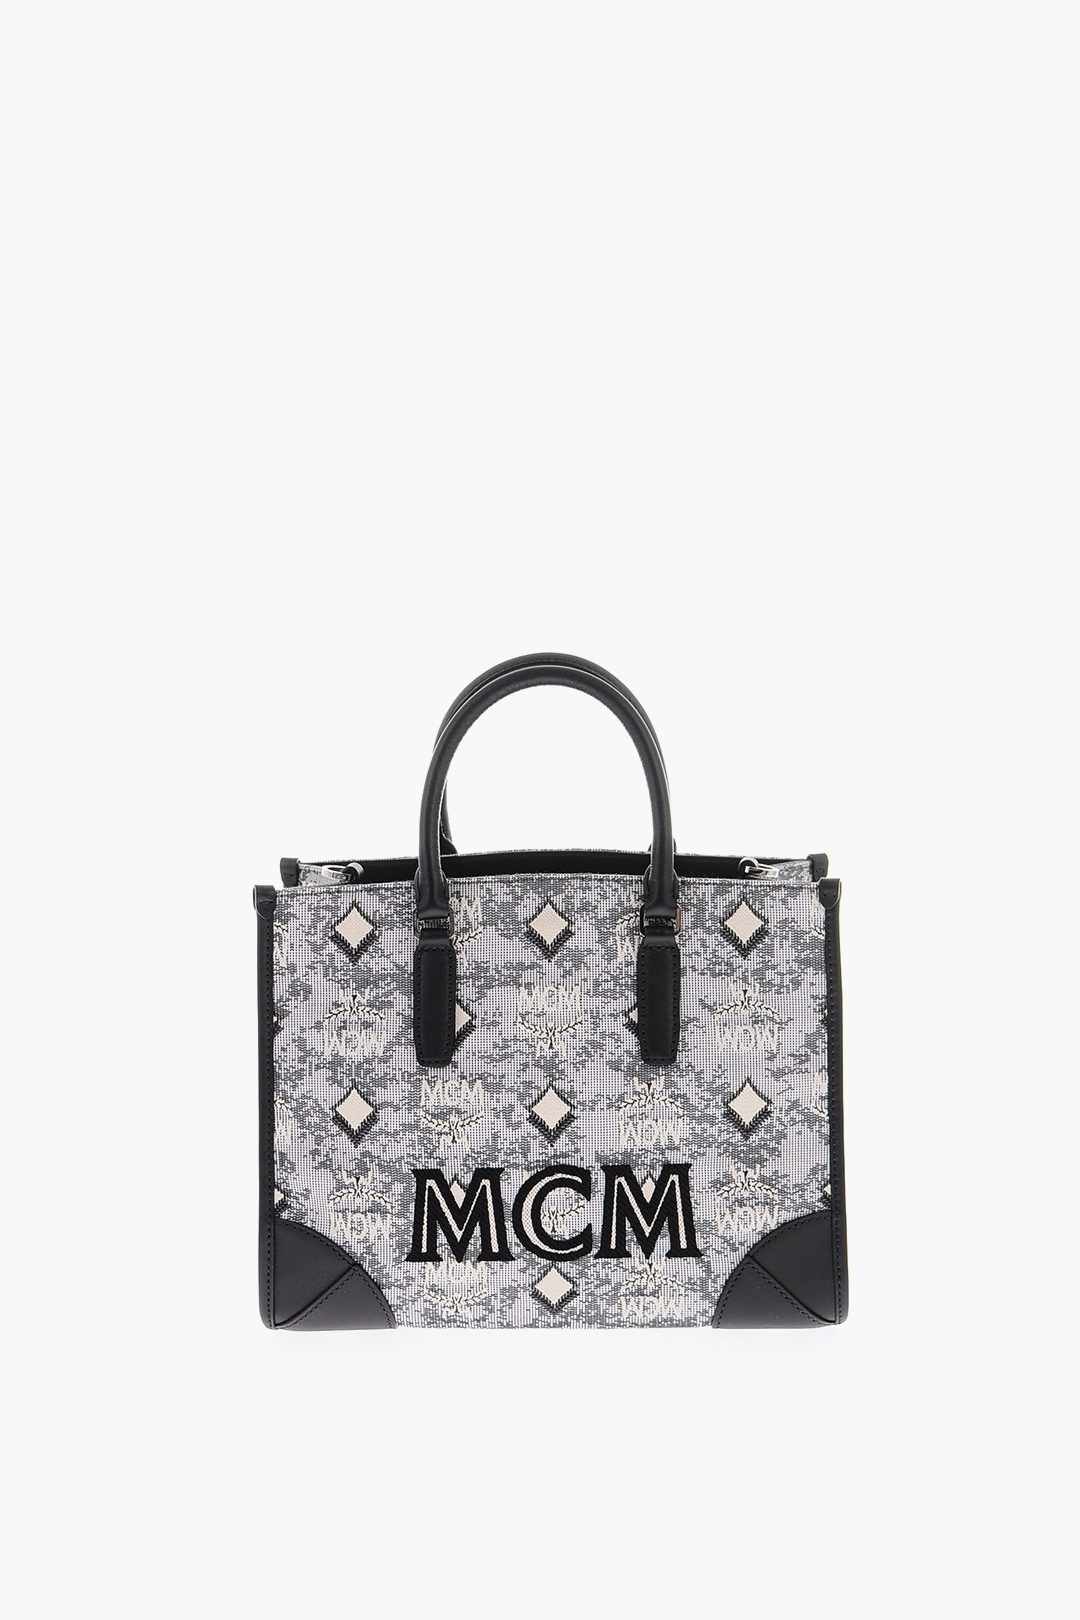 Women's Small Munchen Tote Bag by Mcm